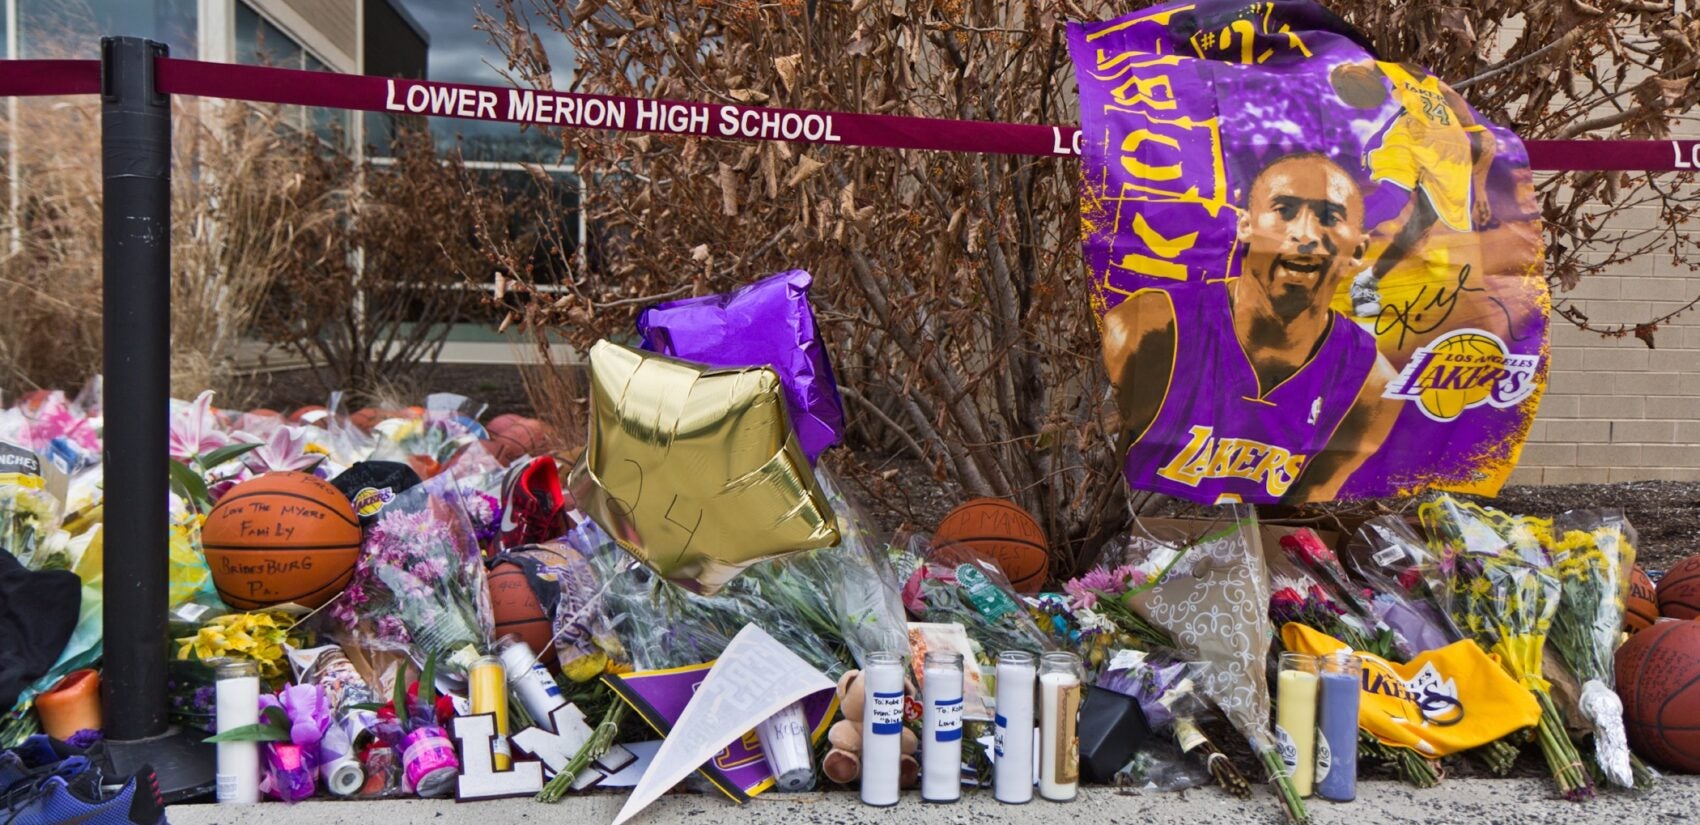 A memorial for late basketball superstar Kobe Bryant grows outside the Lower Merion high school gymnasium named for him. (Kimberly Paynter/WHYY)